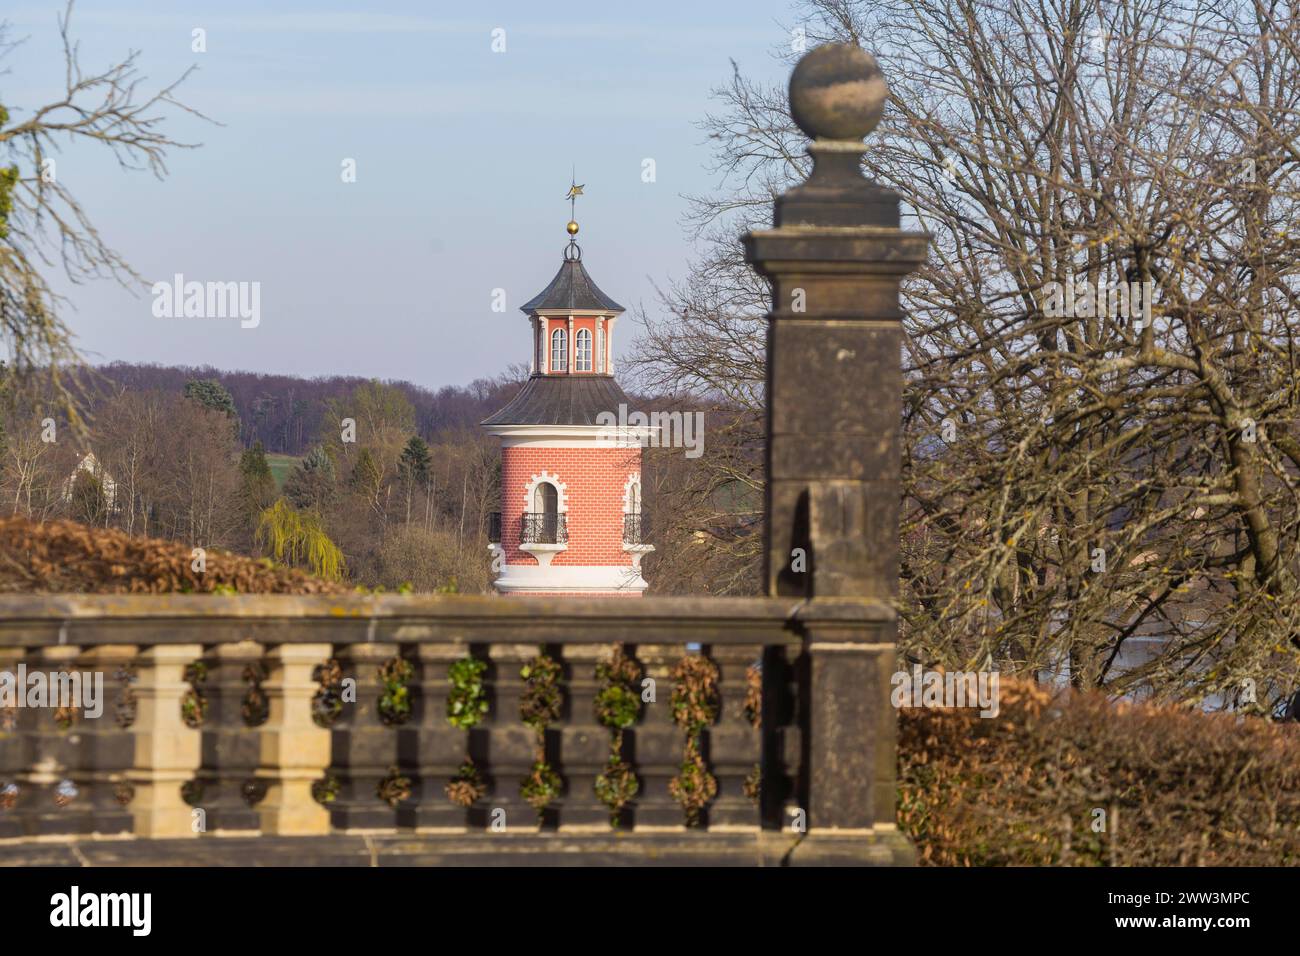 The lighthouse in Moritzburg is an inland lighthouse in Saxony. The staffage structure (folly) was built in the late 18th century as part of a Stock Photo